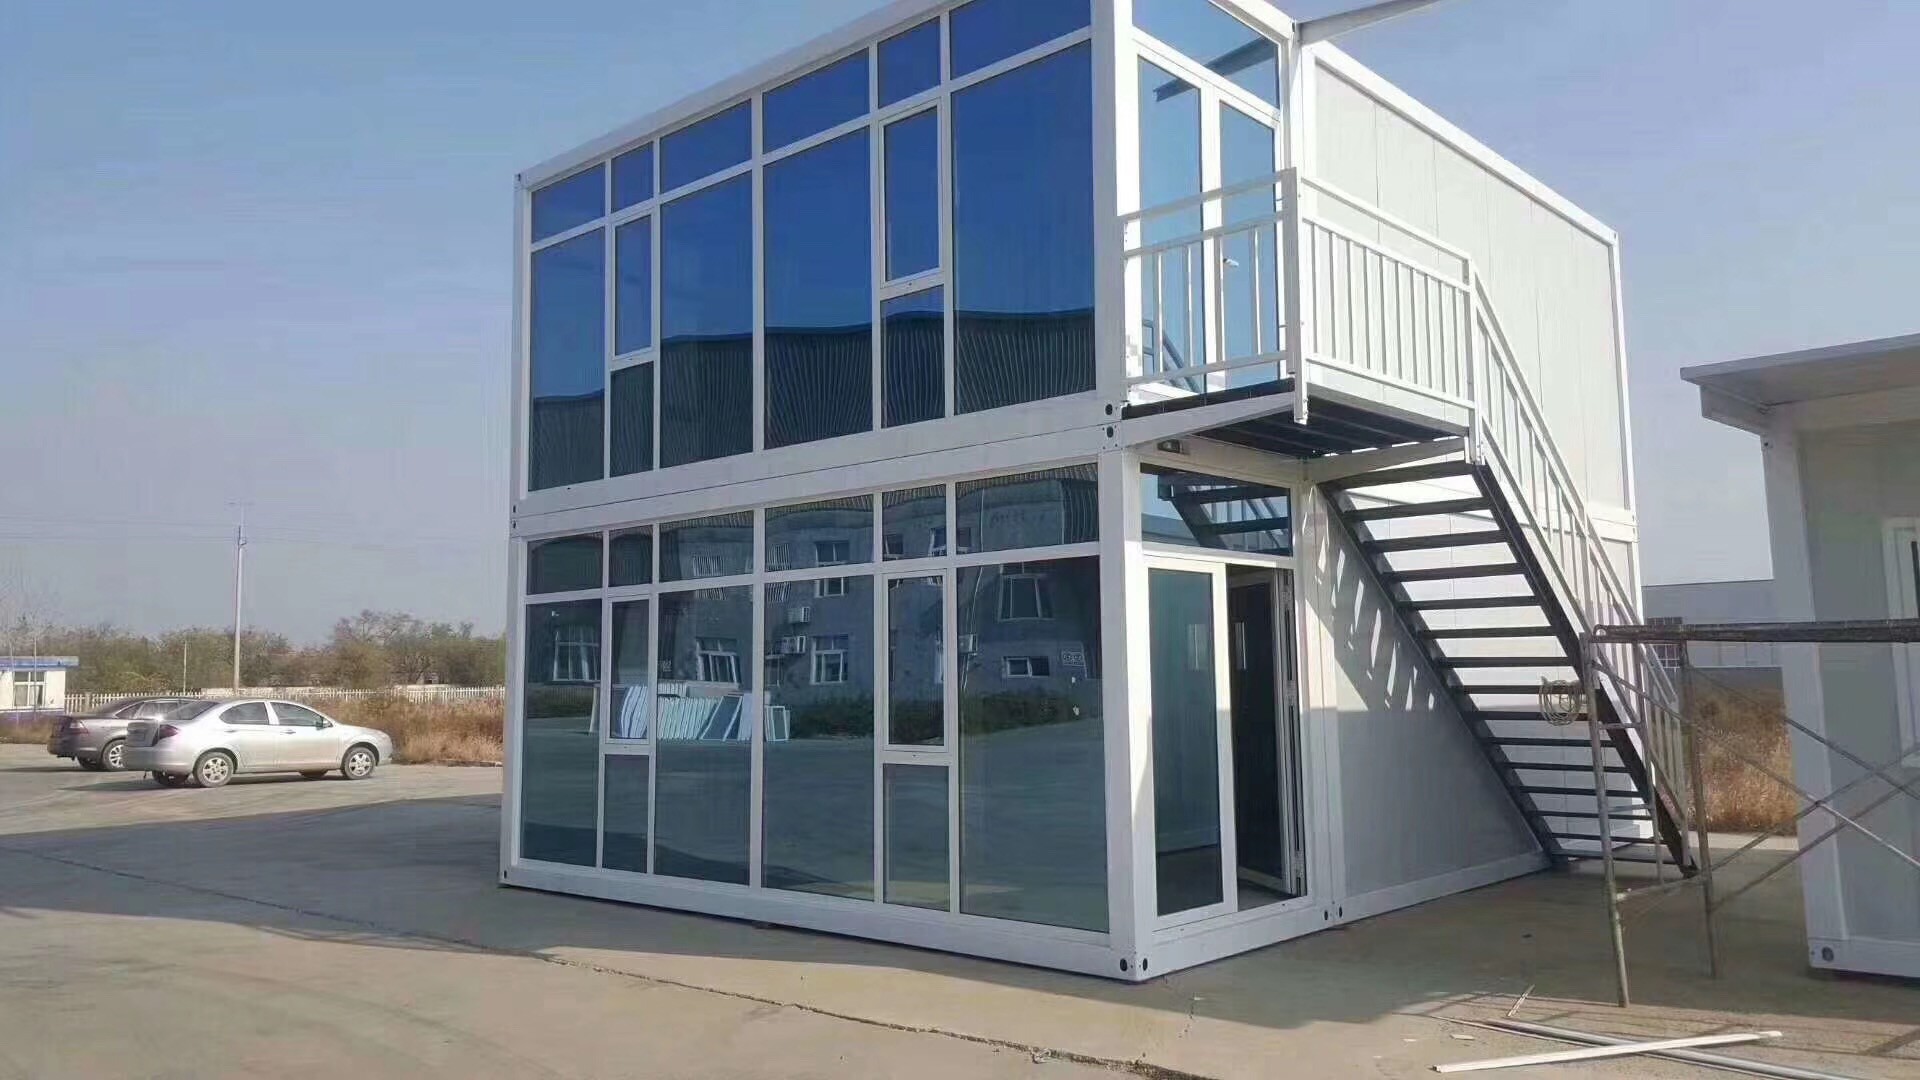 Outdoor customizable assembled prefab modular manufactured mobile portable shipping cacas contener container for sale